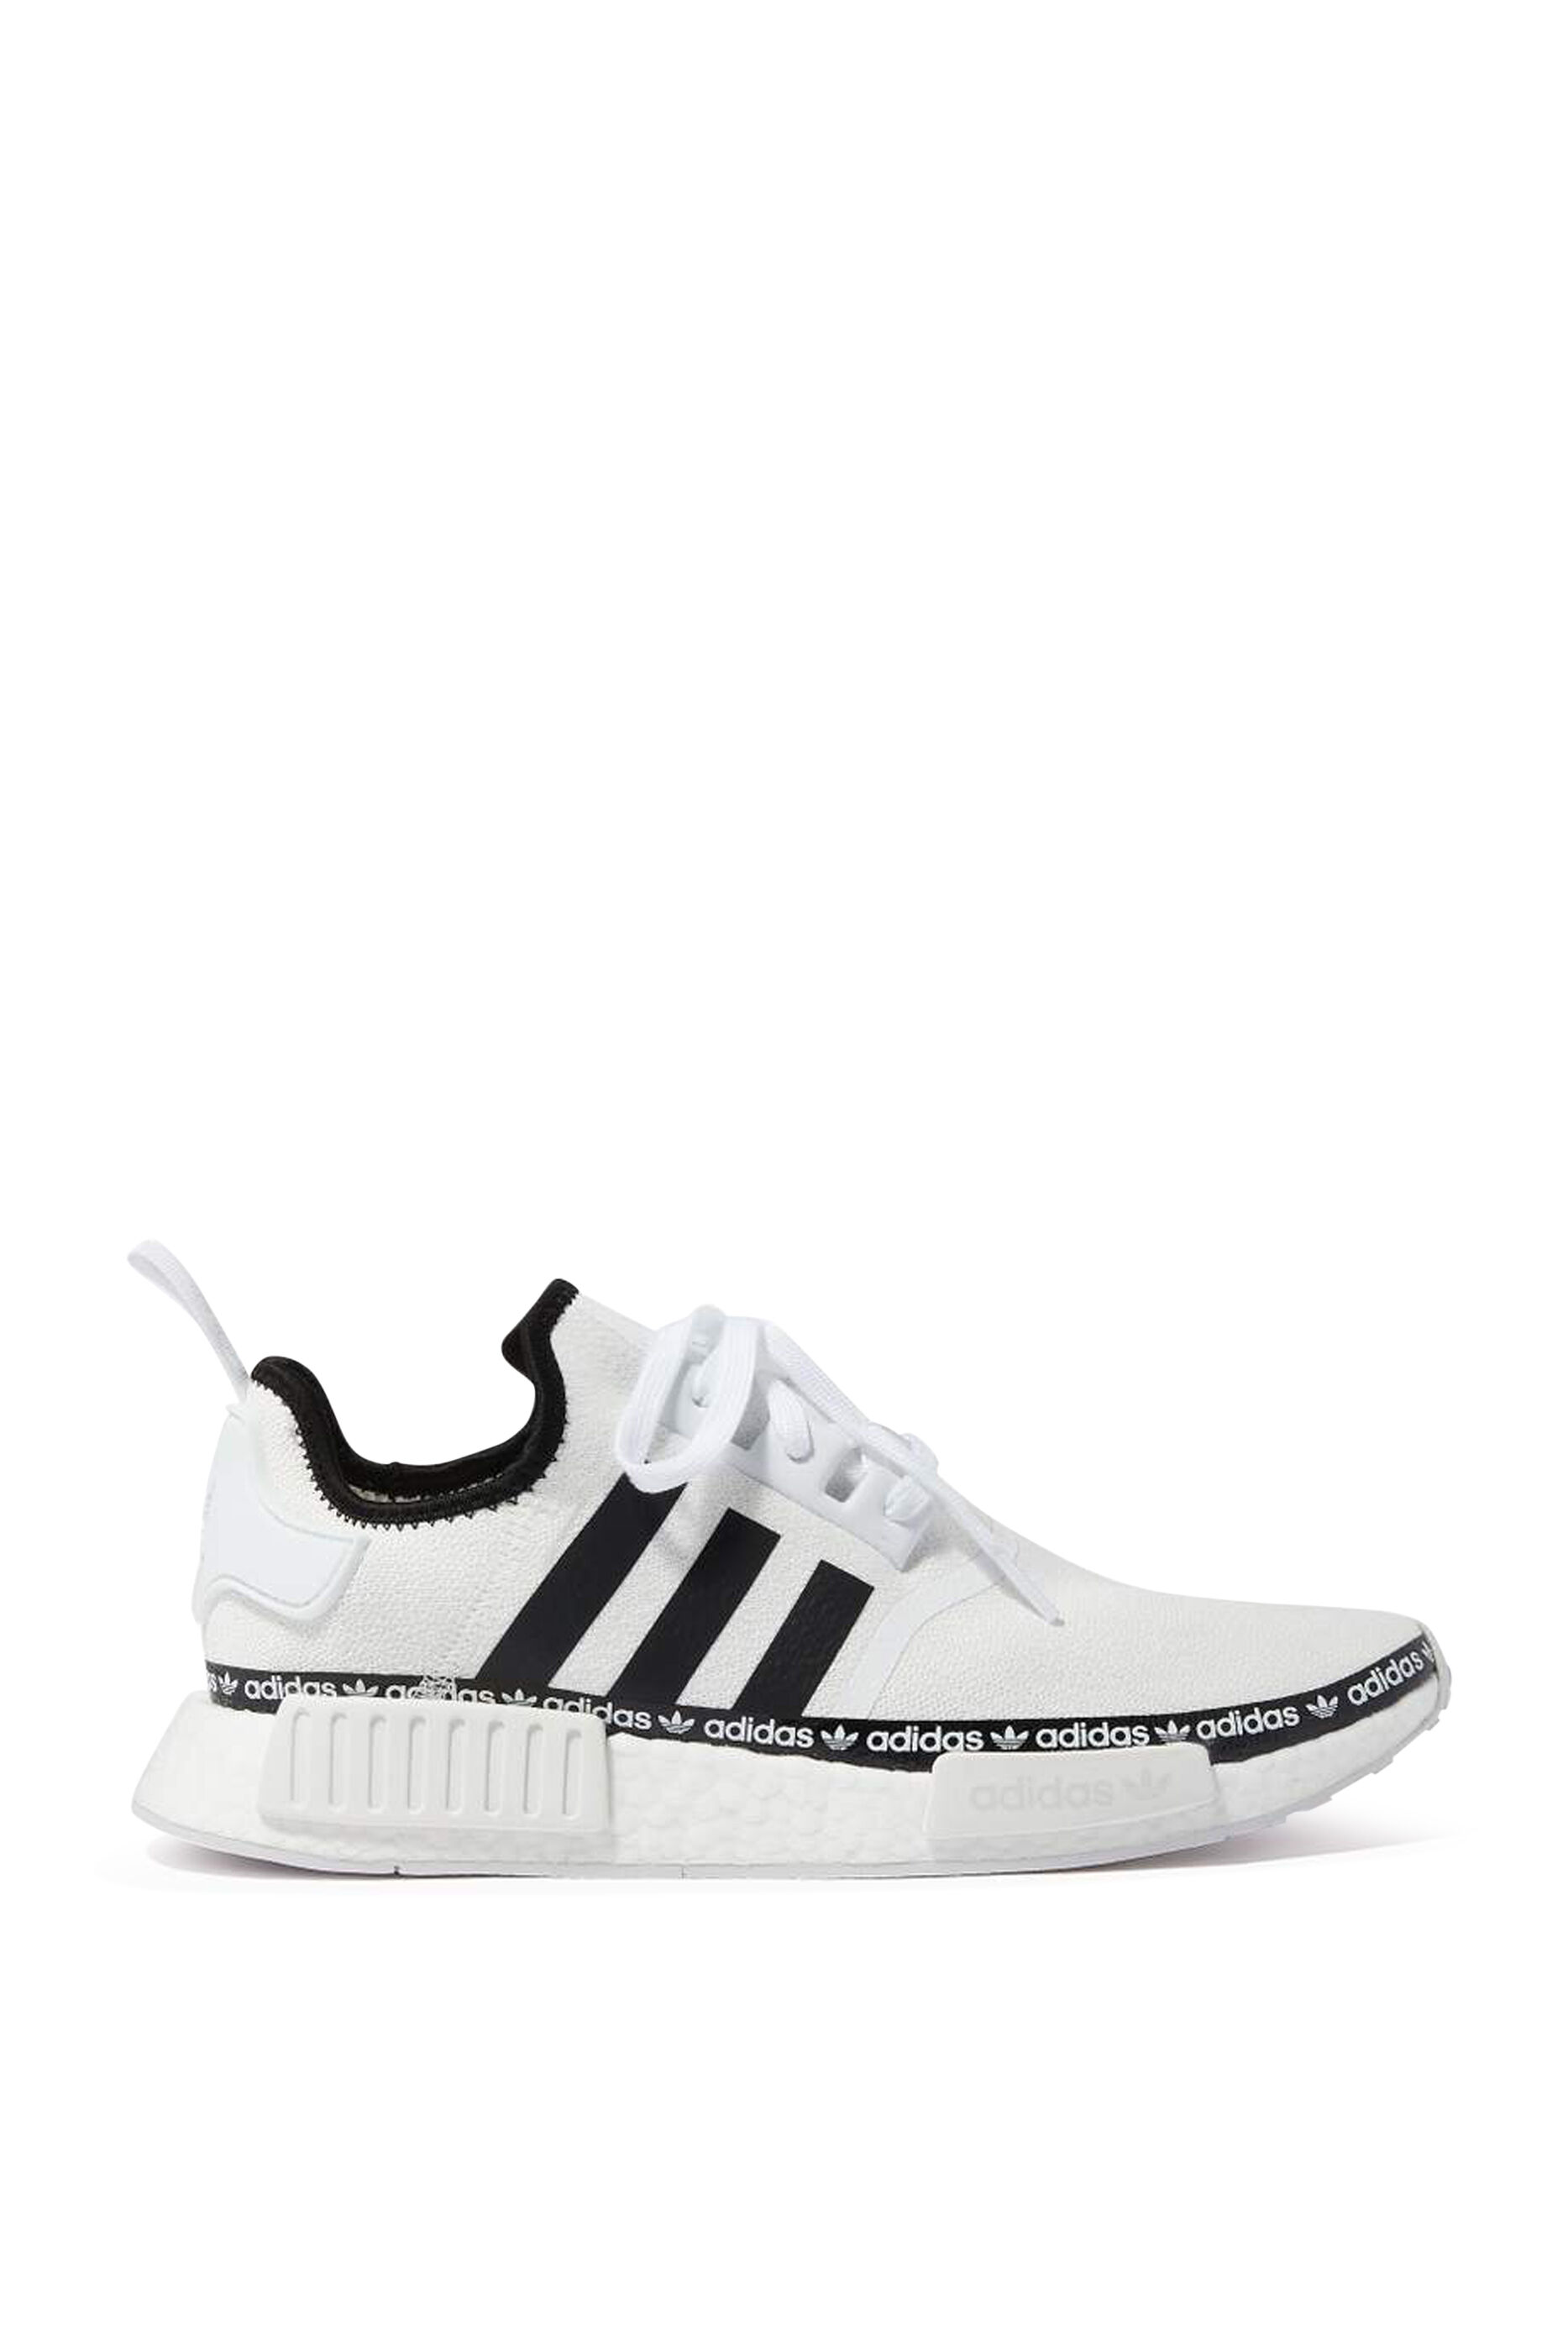 Buy Adidas NMD R1 Sneakers - Mens for 